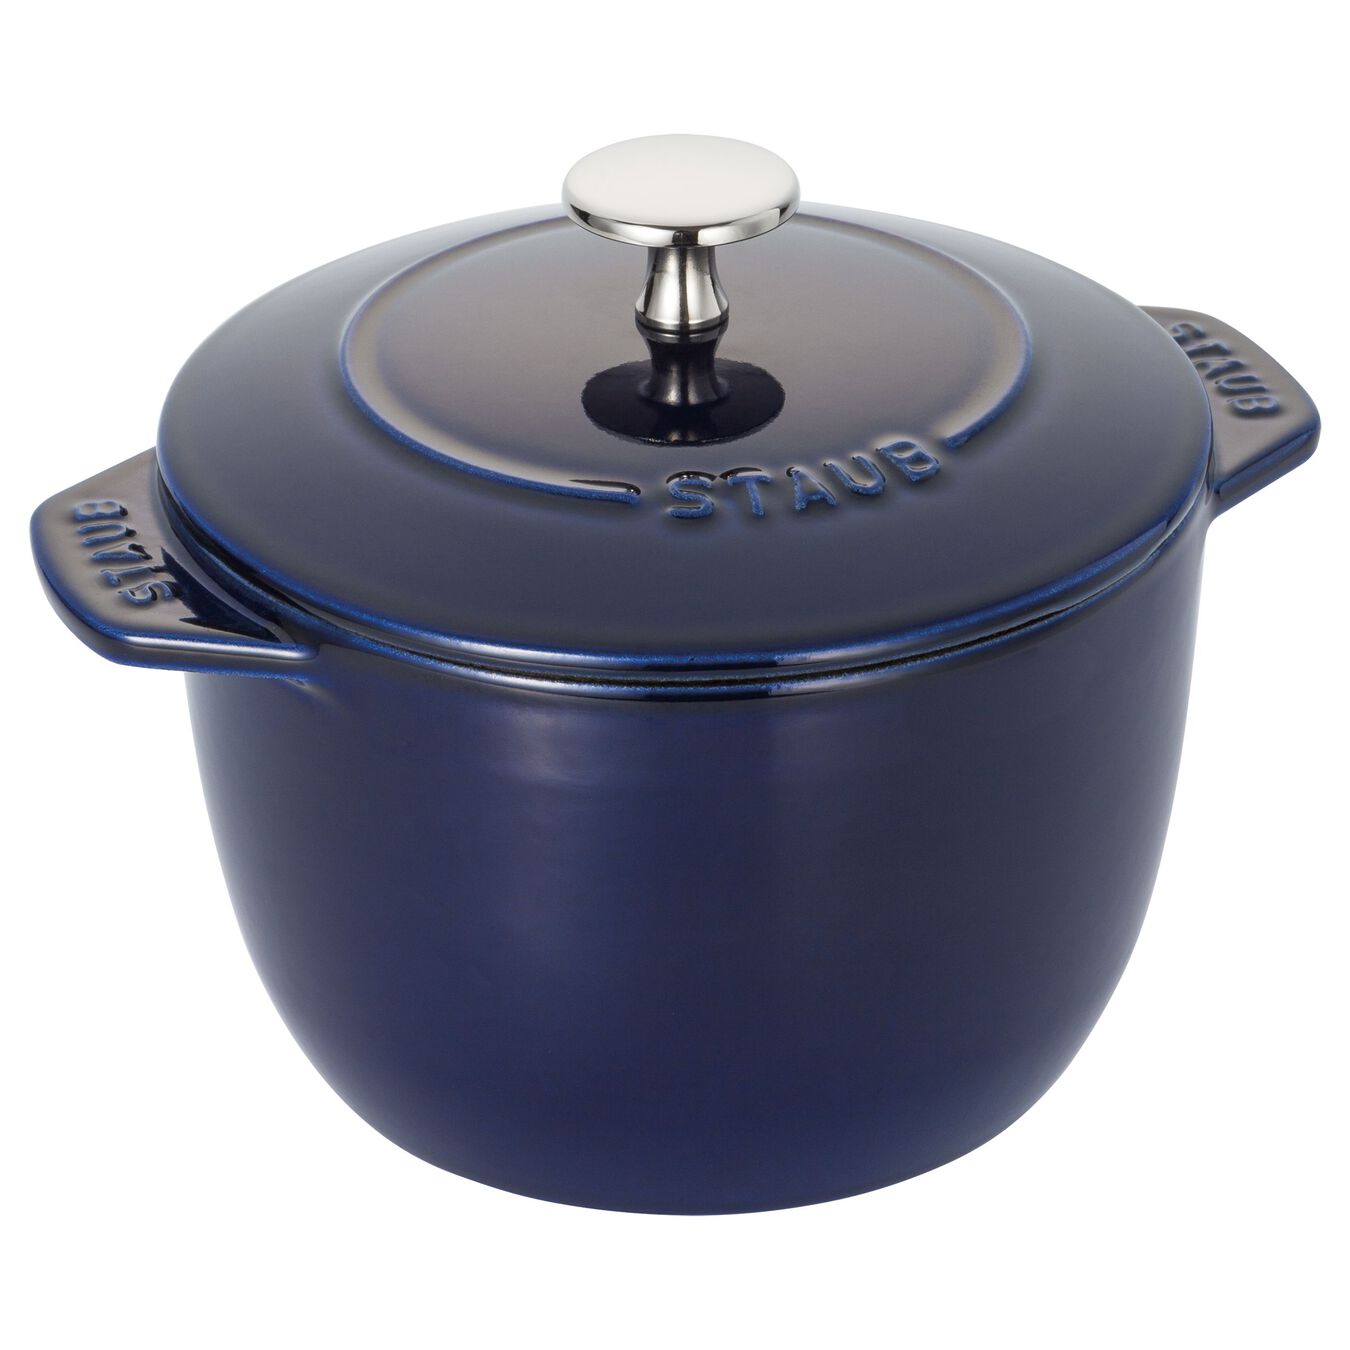 Staub 4-Quart Cast Iron Round Cocotte with Glass Lid - Turquoise